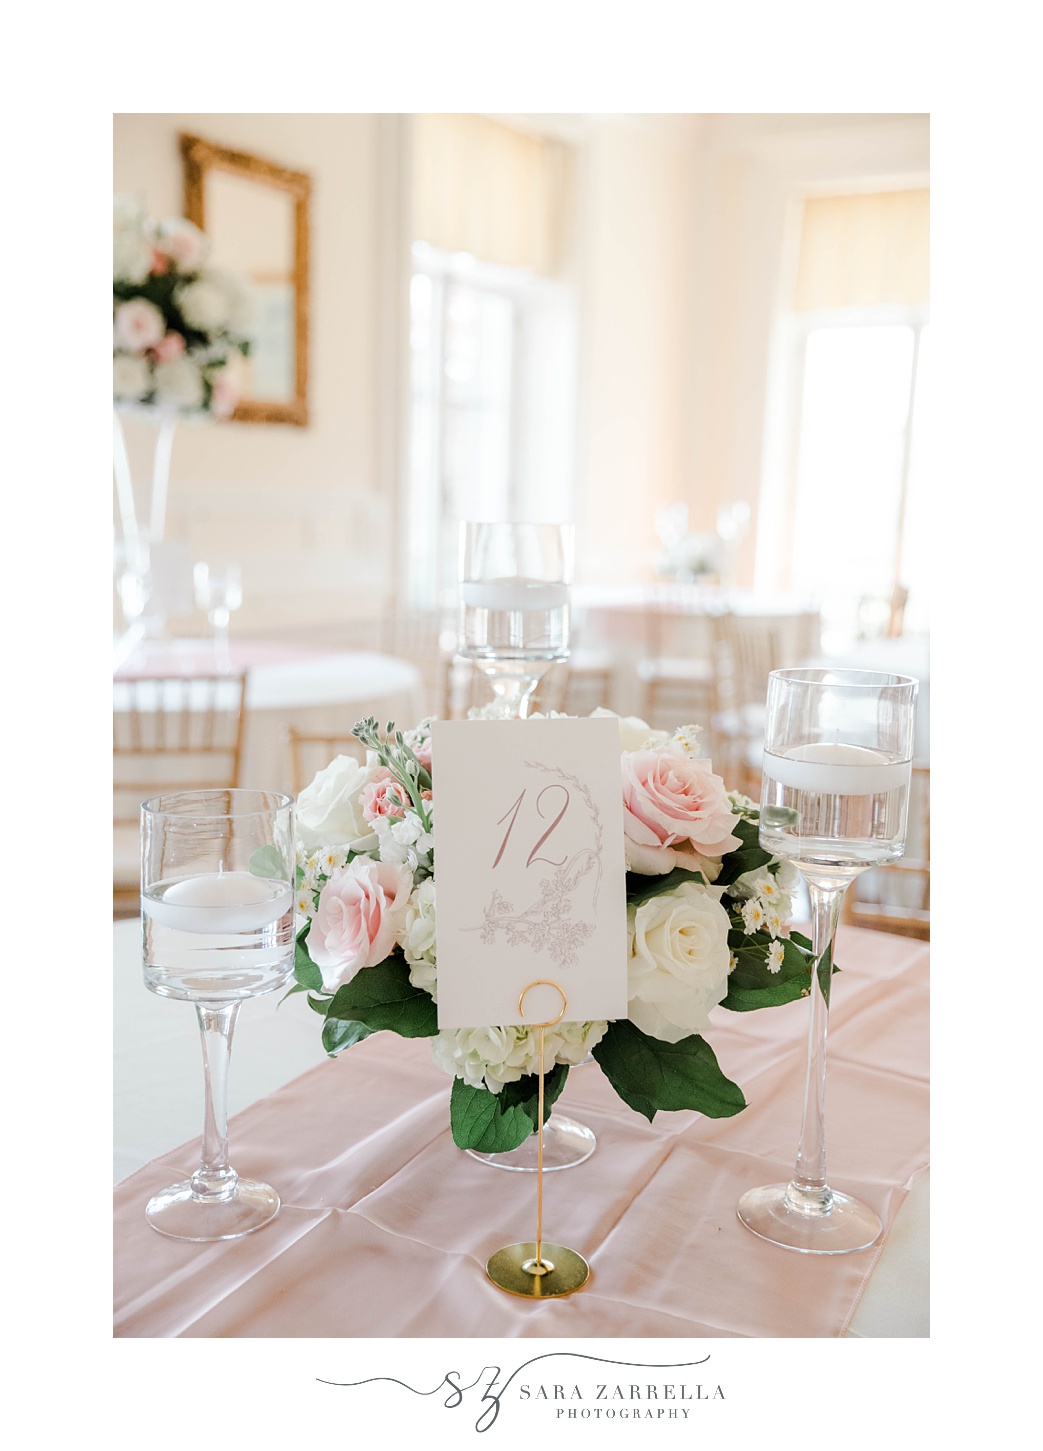 pink and white rose centerpieces for RI wedding reception